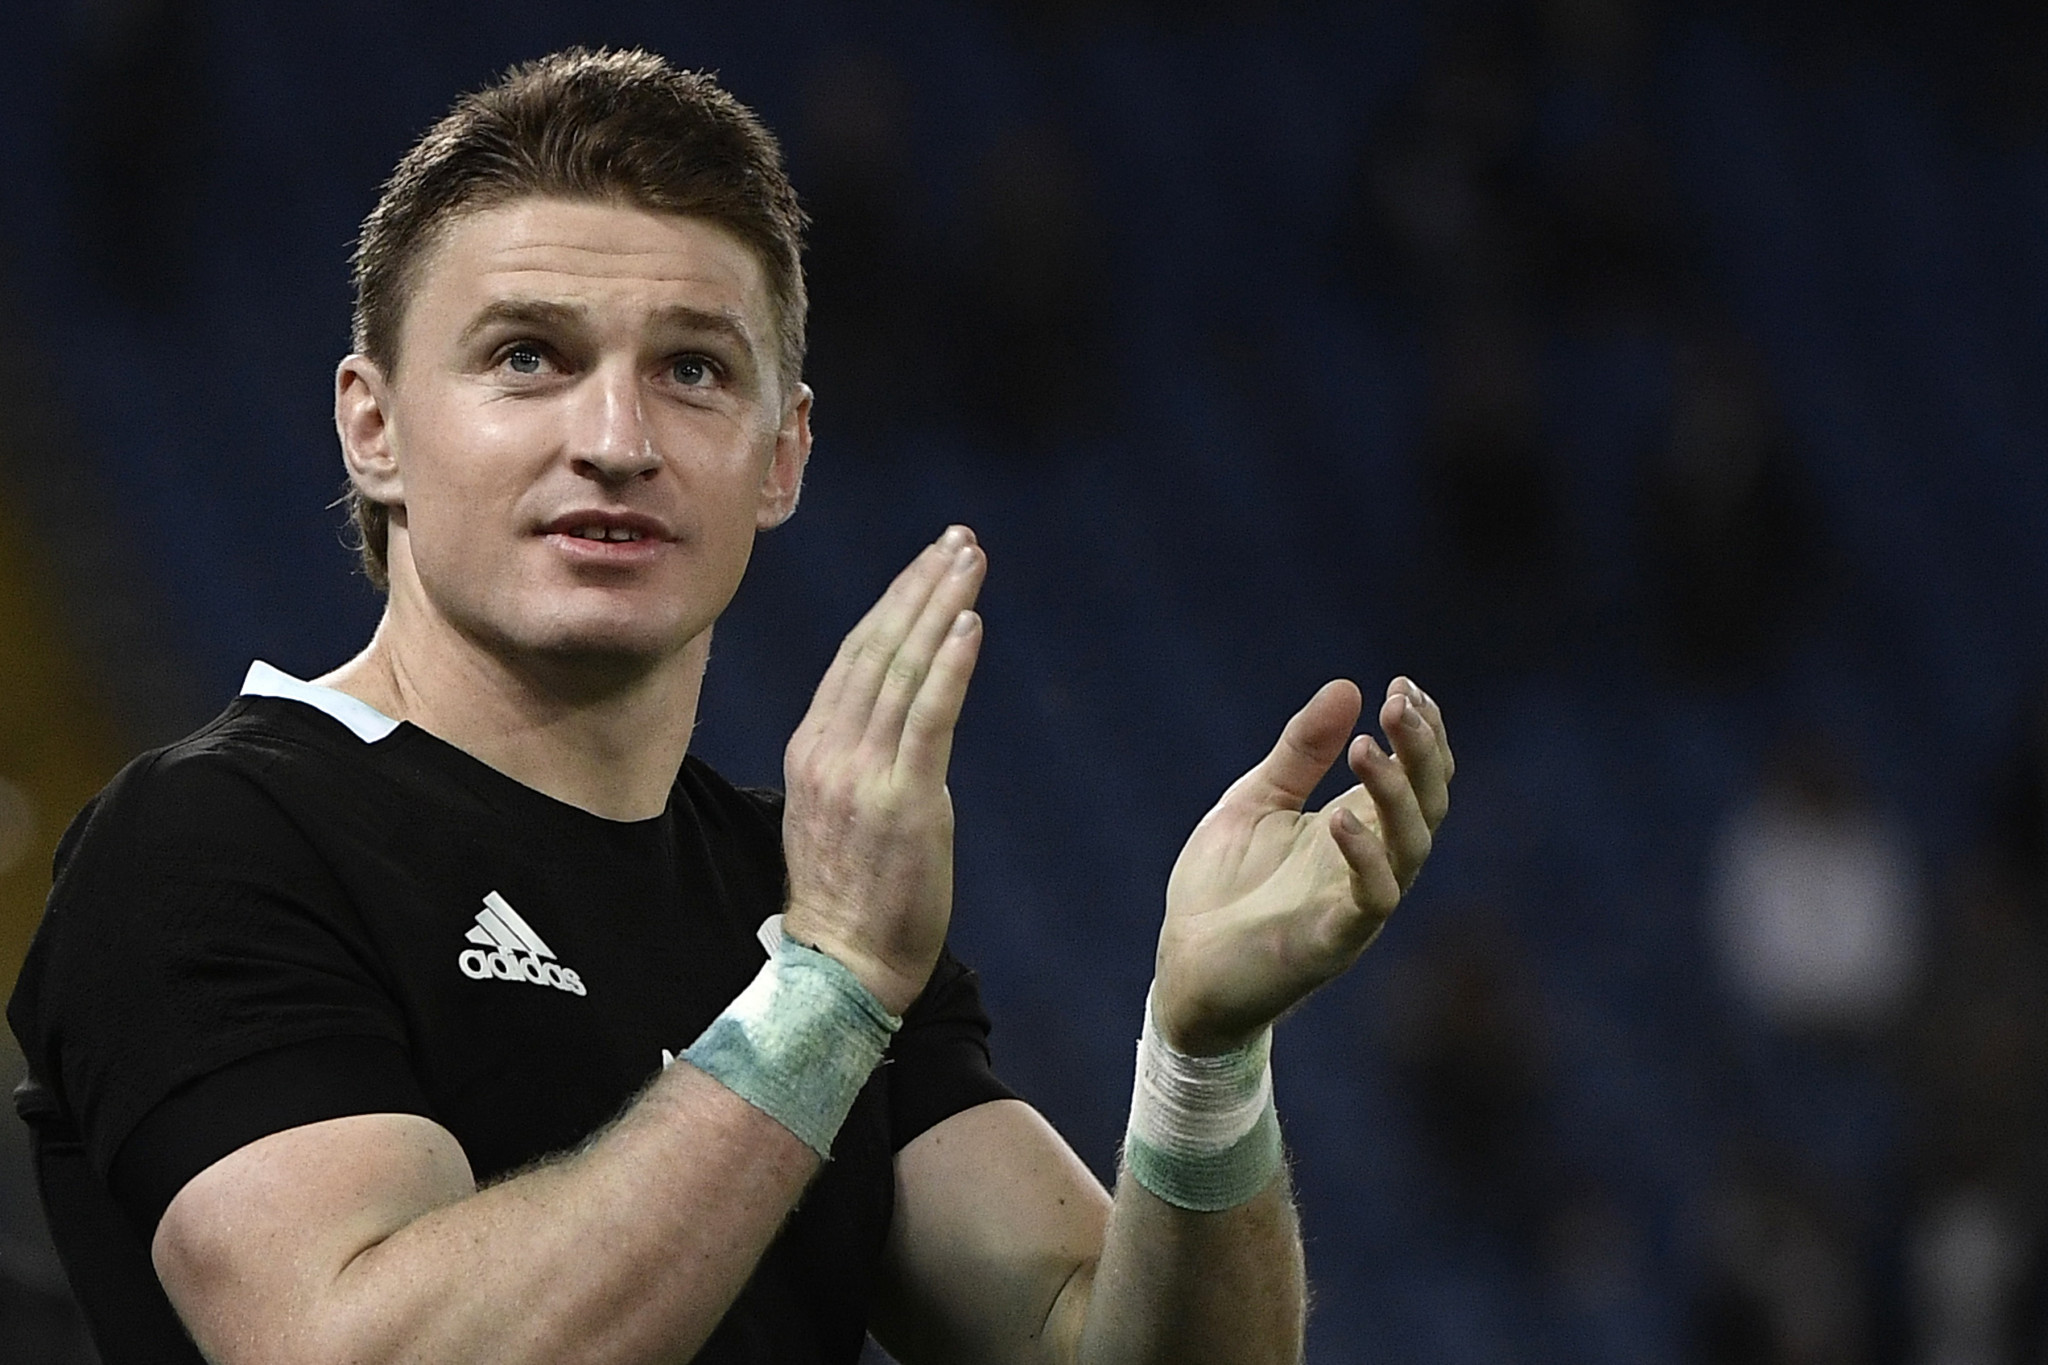 New Zealand's Beauden Barrett could become the first player to win the World Rugby Men's Player of the Year award for the third successive year ©Getty Images